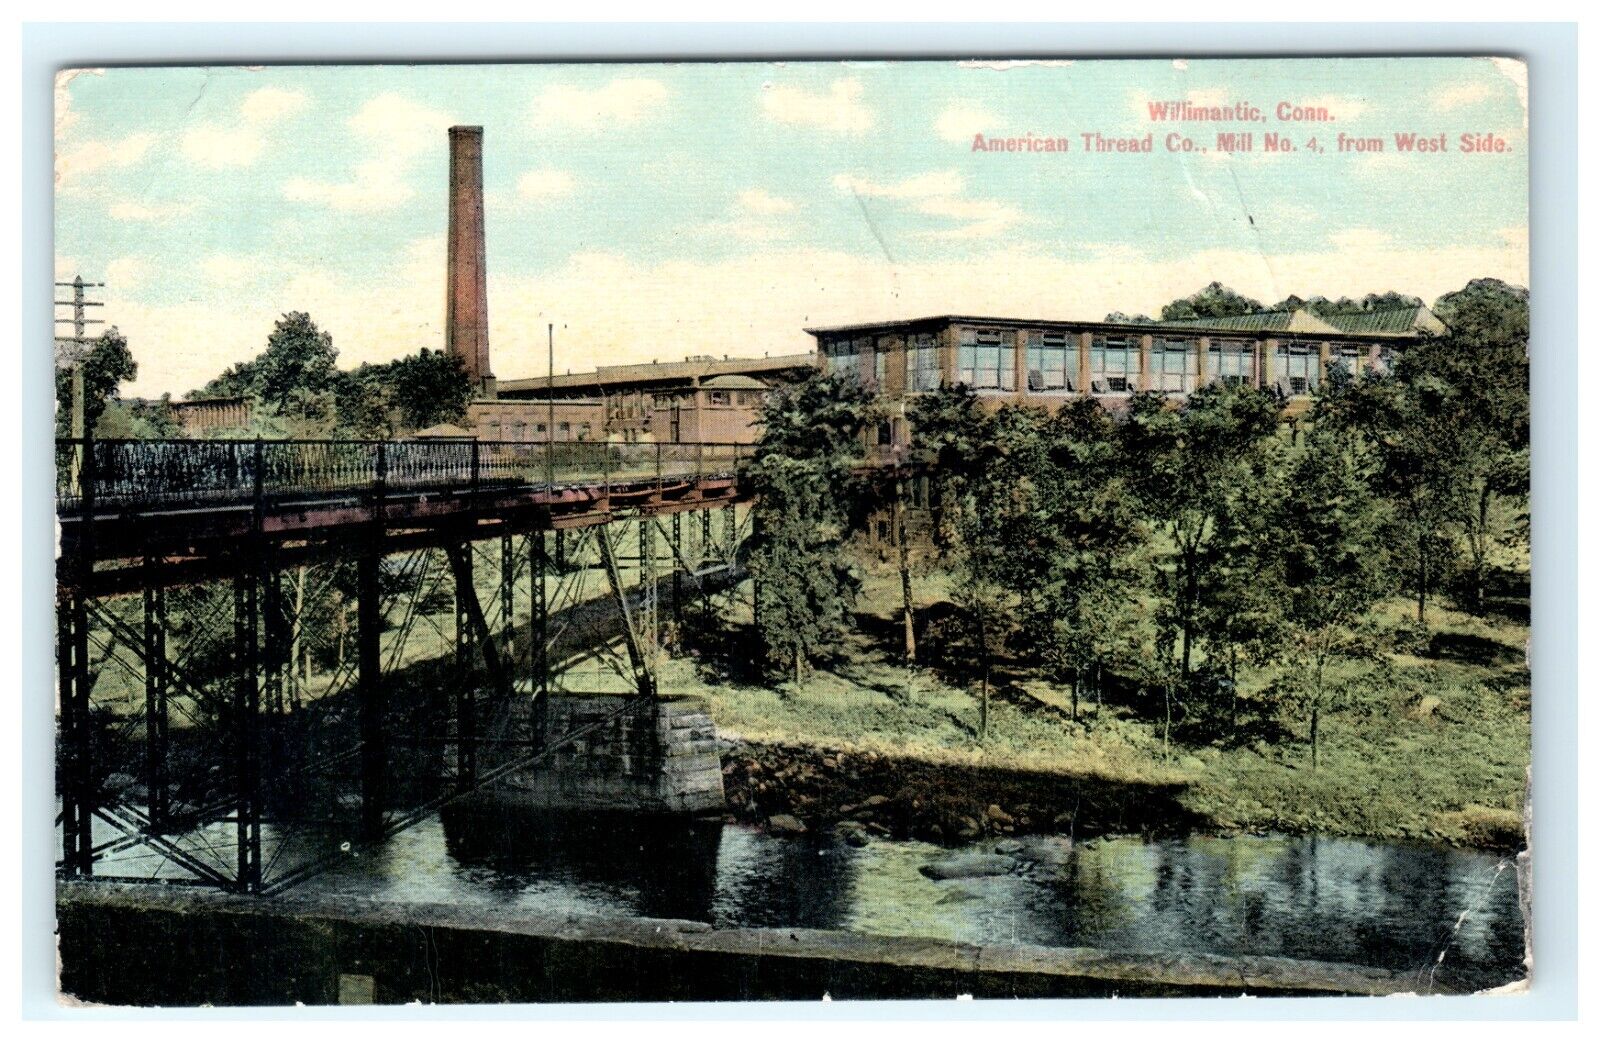 1911 American Thread Co. Willimantic CT Connecticut Early Postcard - DAMAGED